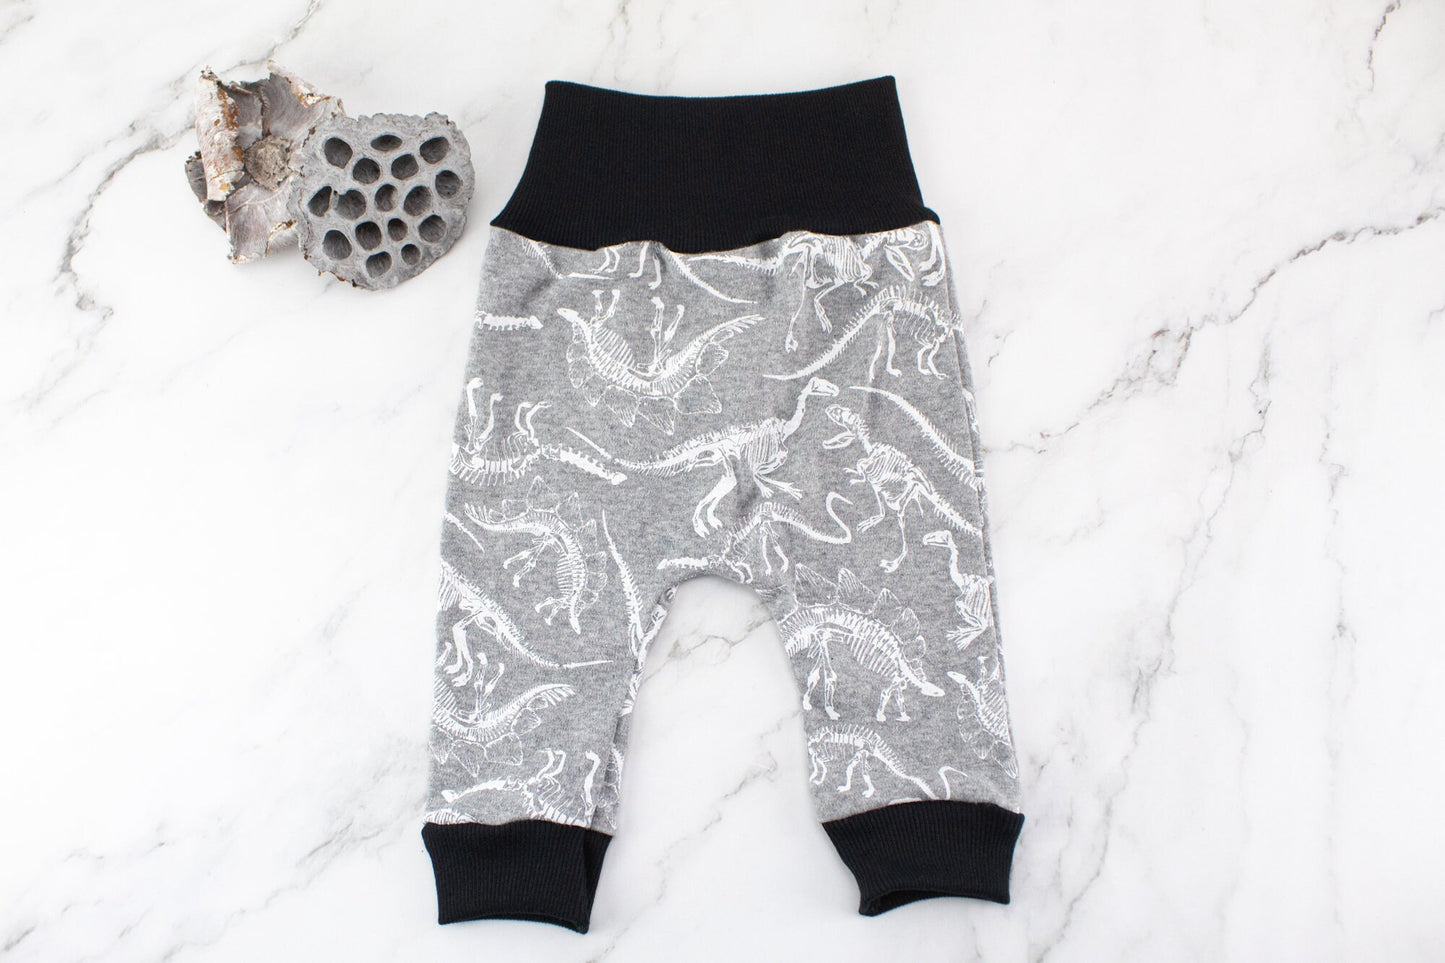 Gray and White Dinosaurs Print Knit Harem Pants with Wide Black Band 3-6 months or 12-18 months